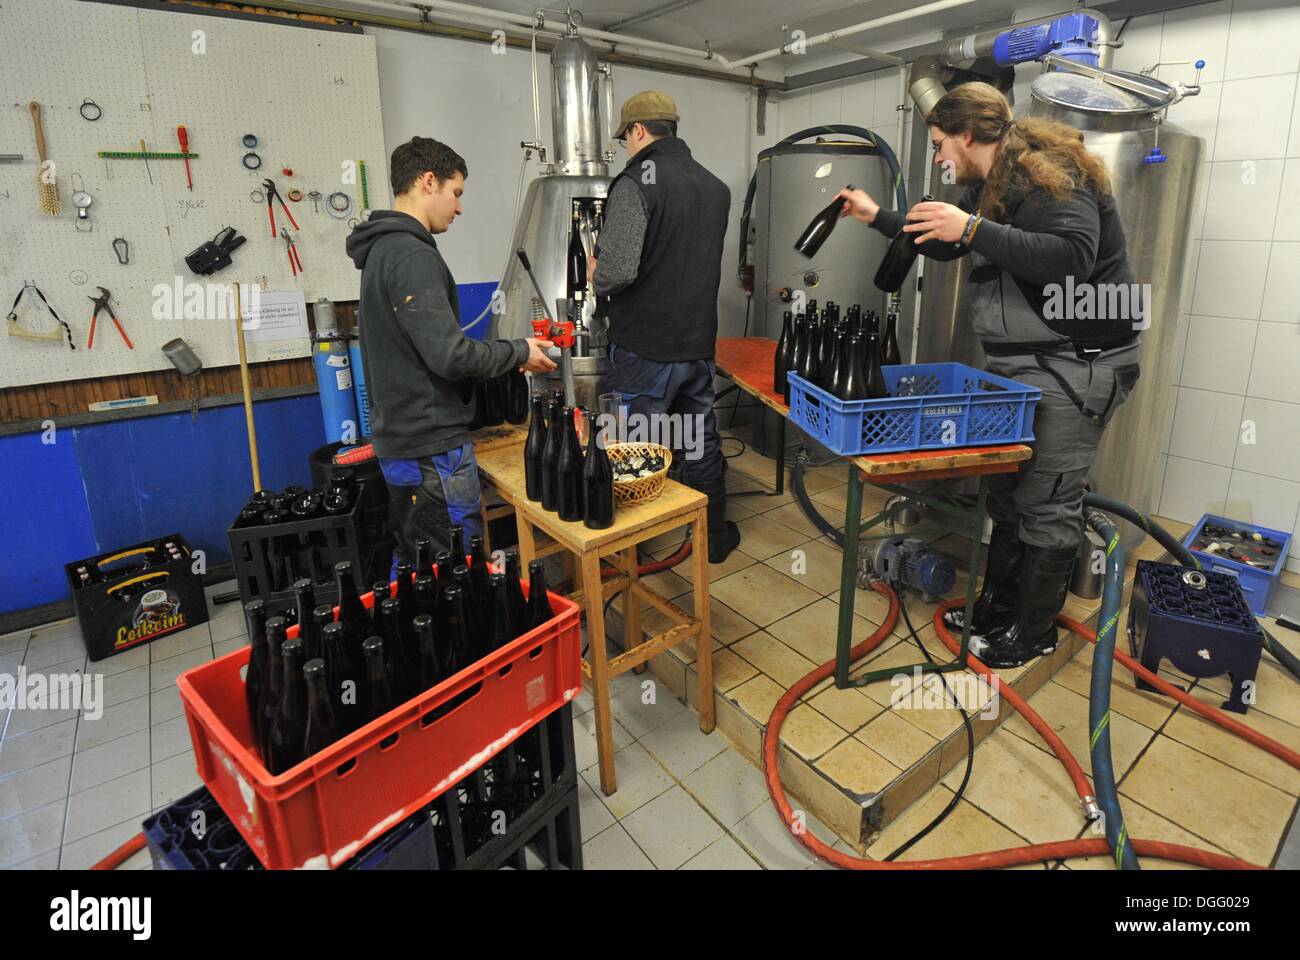 Munich, Germany. 14th Feb, 2013. Employees bottle beer at the private brewery 'Giesinger Braeu' in Munich, Germany, 14 February 2013. Photo: Andreas Gebert/dpa/Alamy Live News Stock Photo